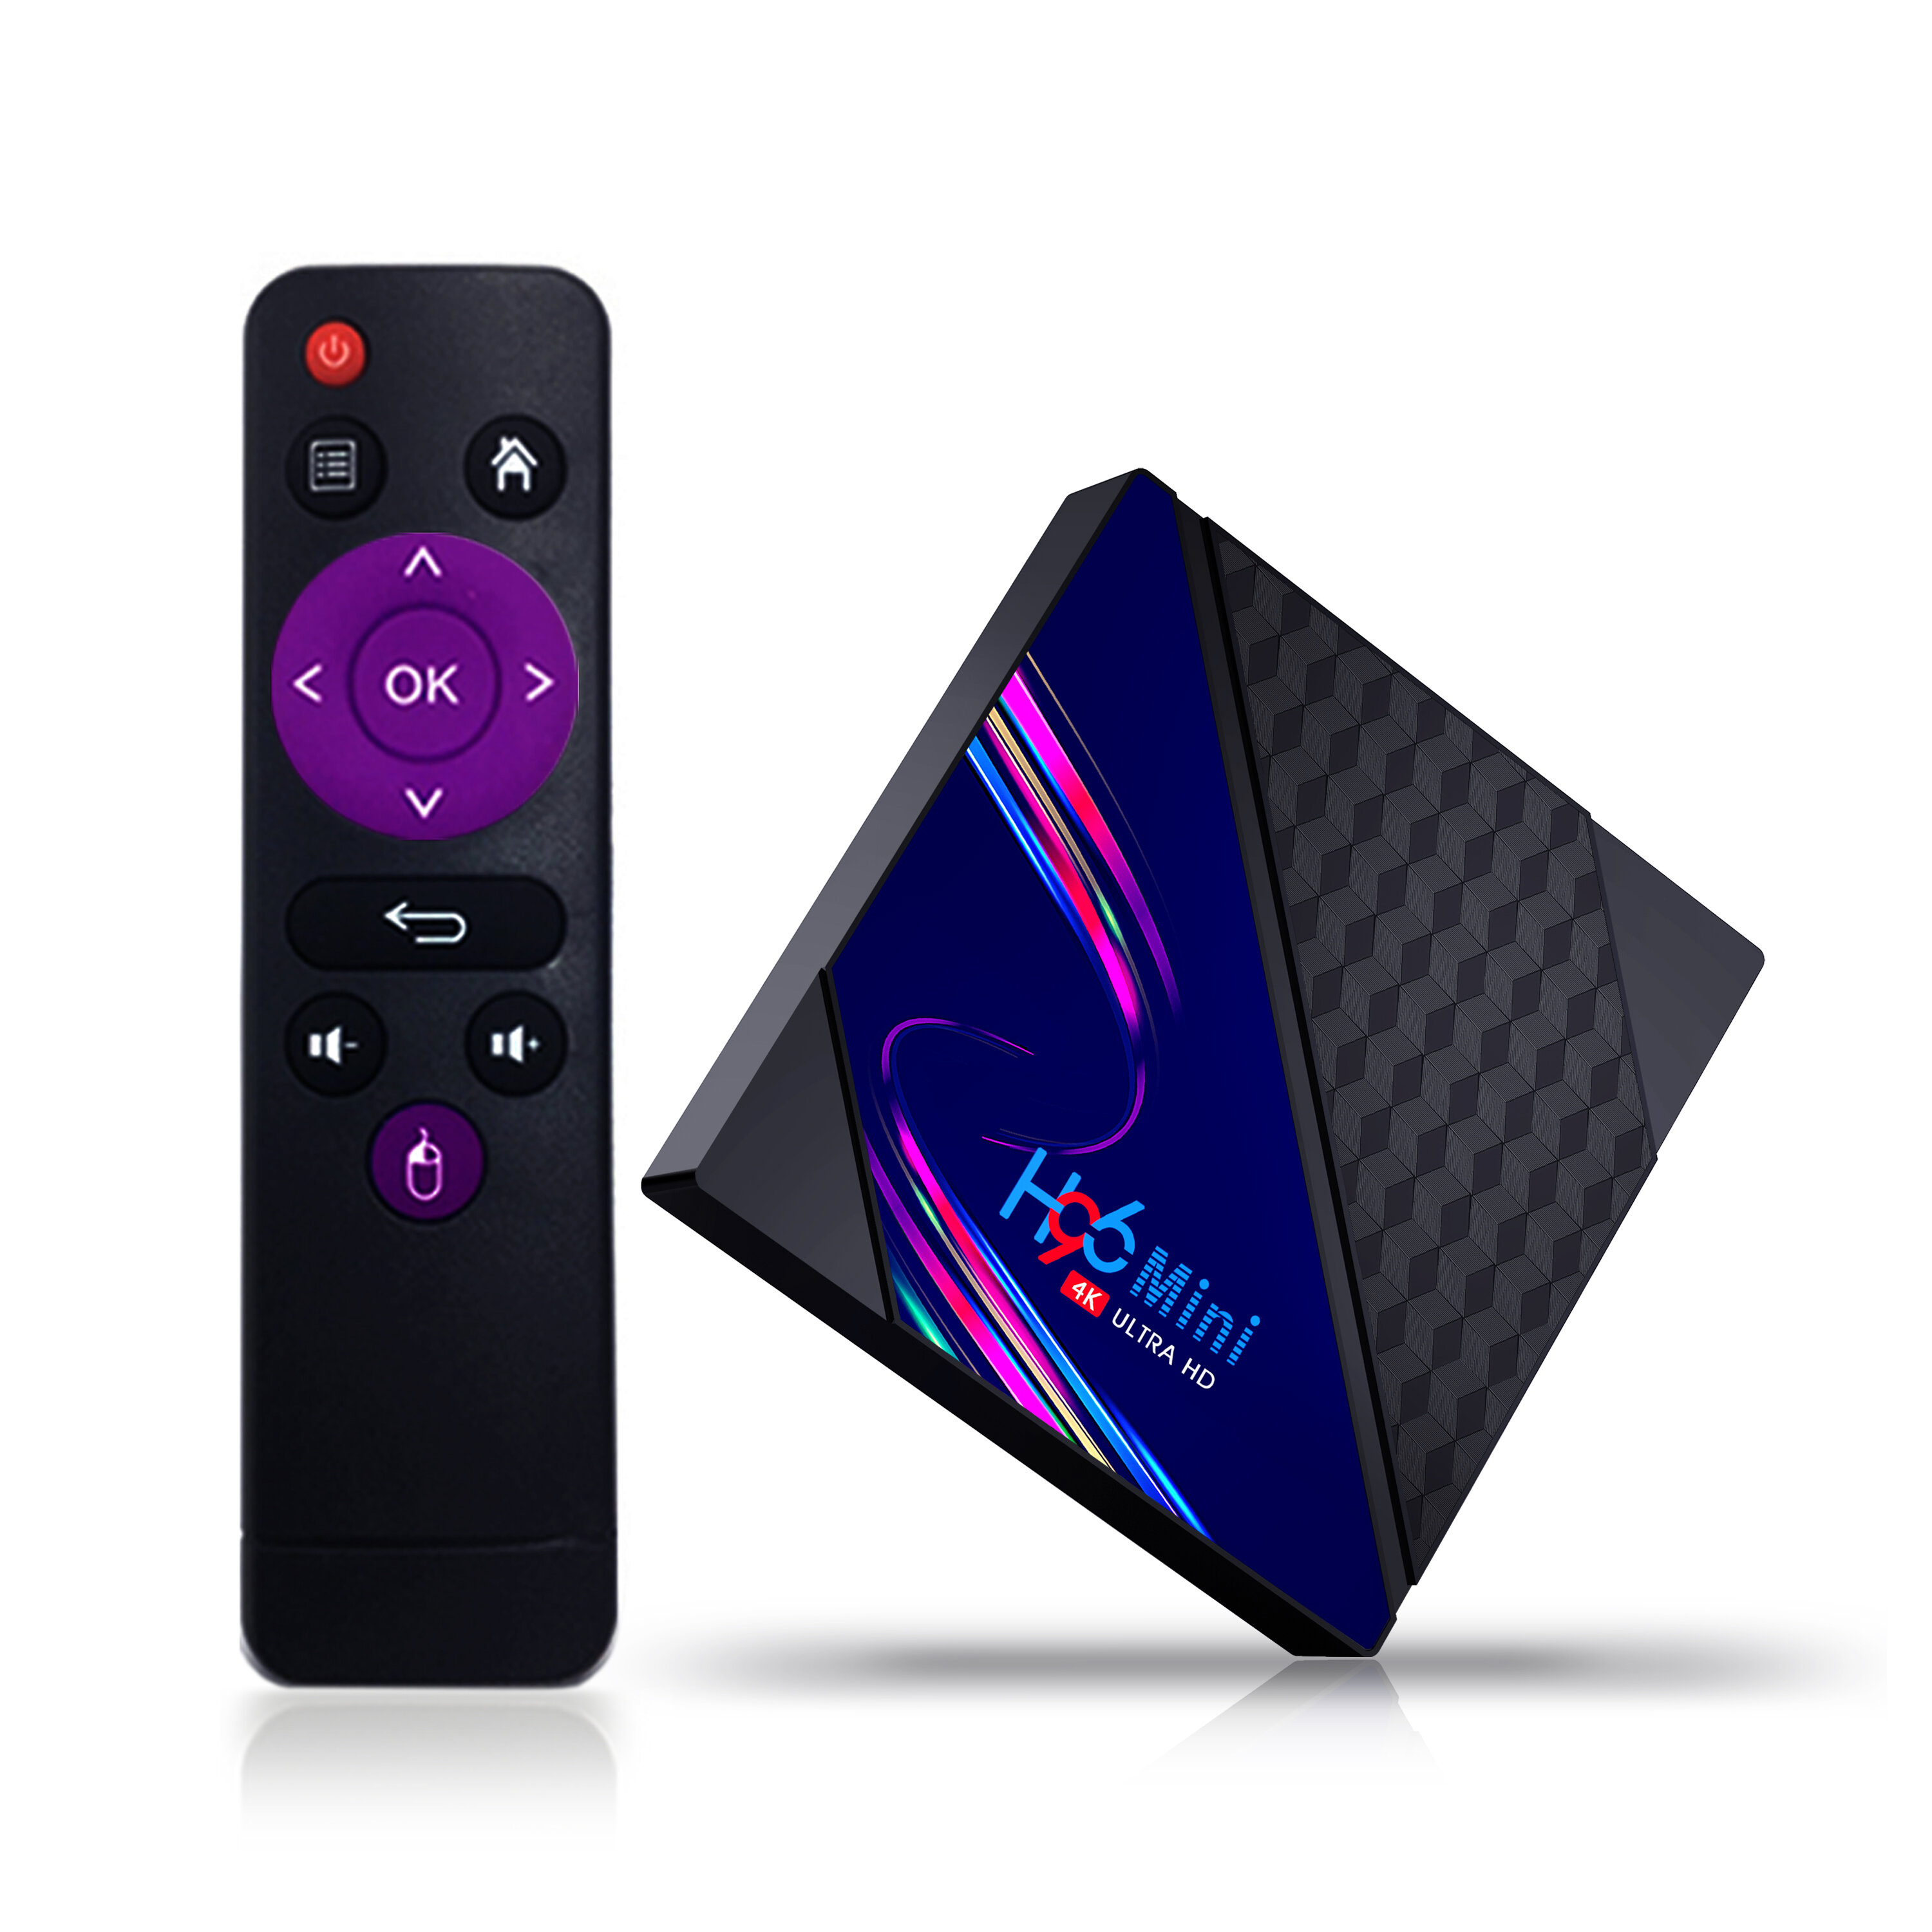 Generic 28-016-600 CS918 RK3229 Android 5.1.1/4.4.2 Quad Core Tv Box 2 with 8G Wi-Fi